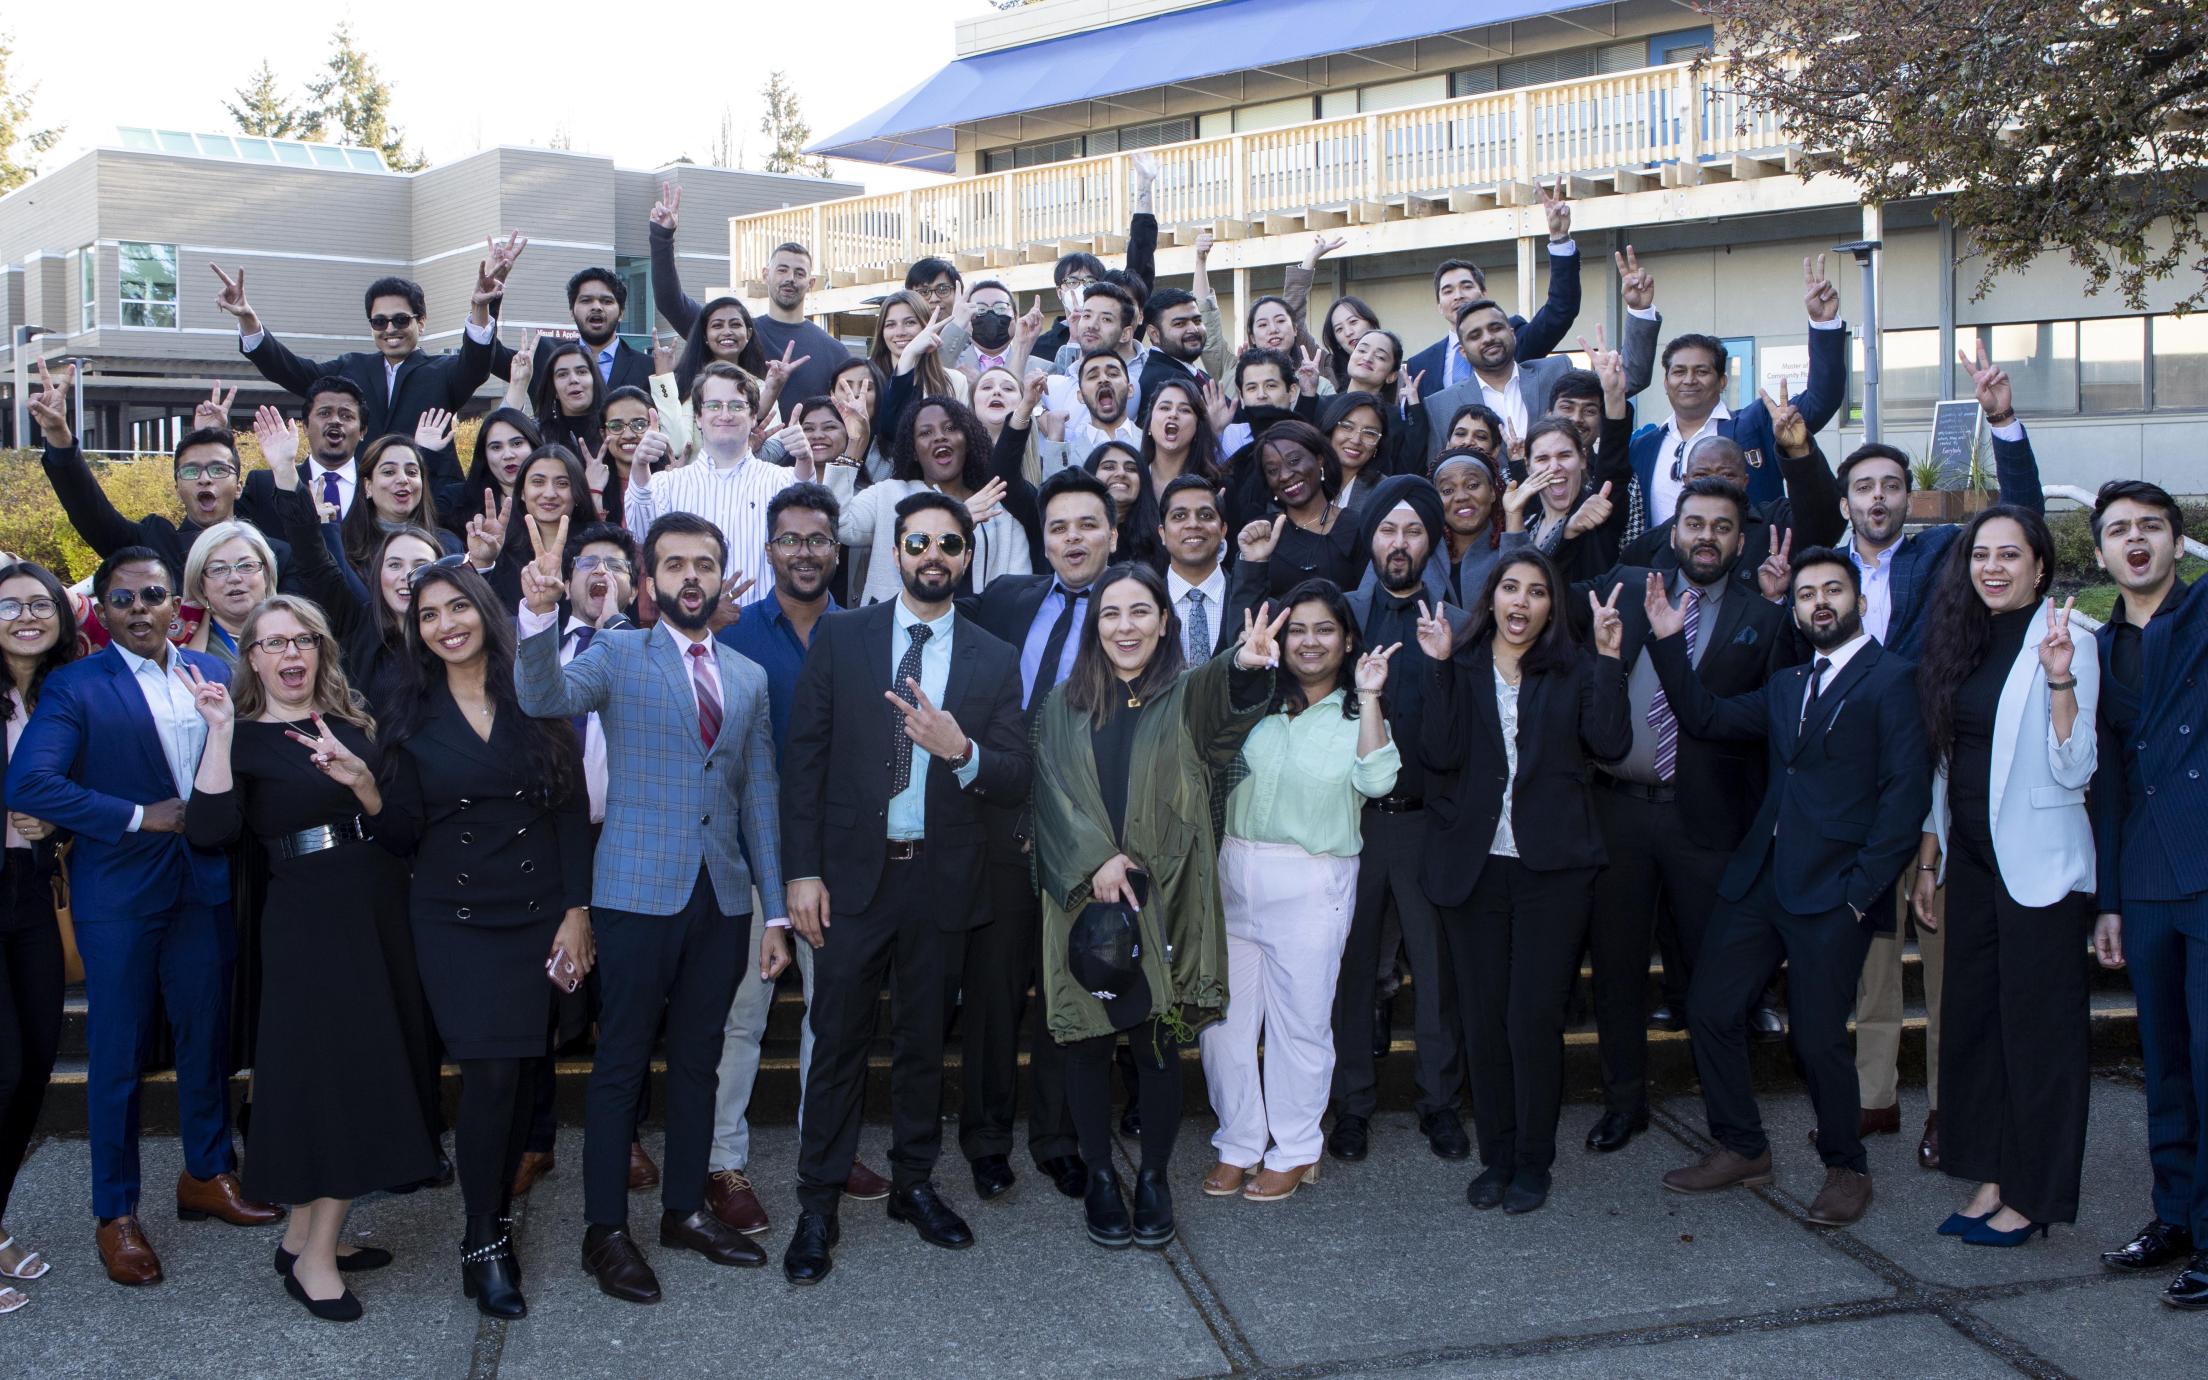 MBA students posing as a big group